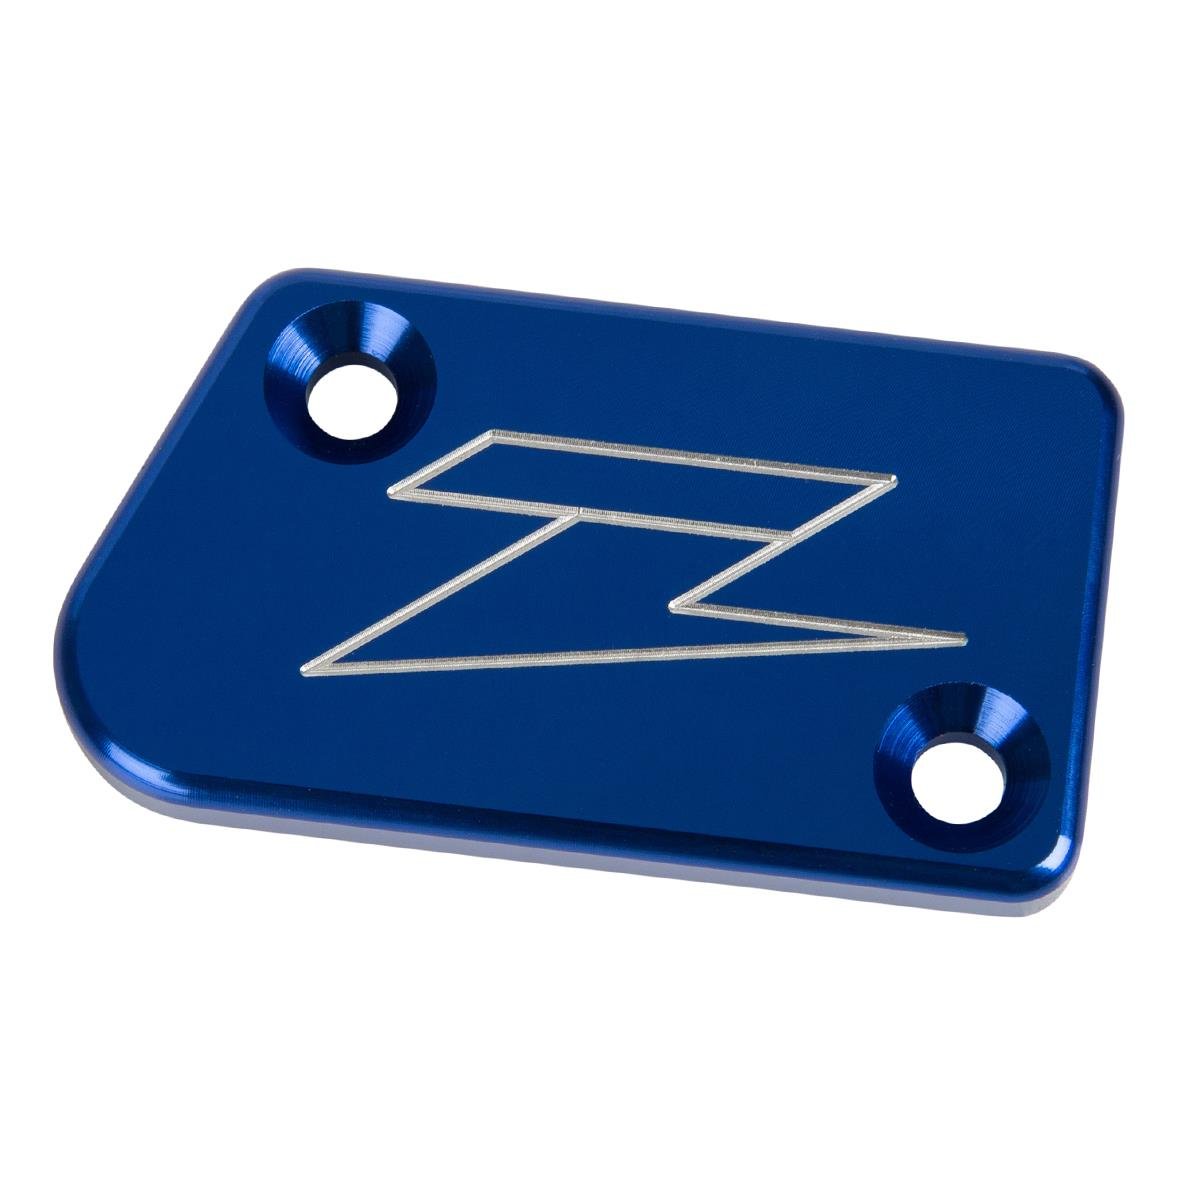 Zeta Cover  For Brake Reservoirs, front, Blue, Yamaha YZ 125/250, YZF 250/450